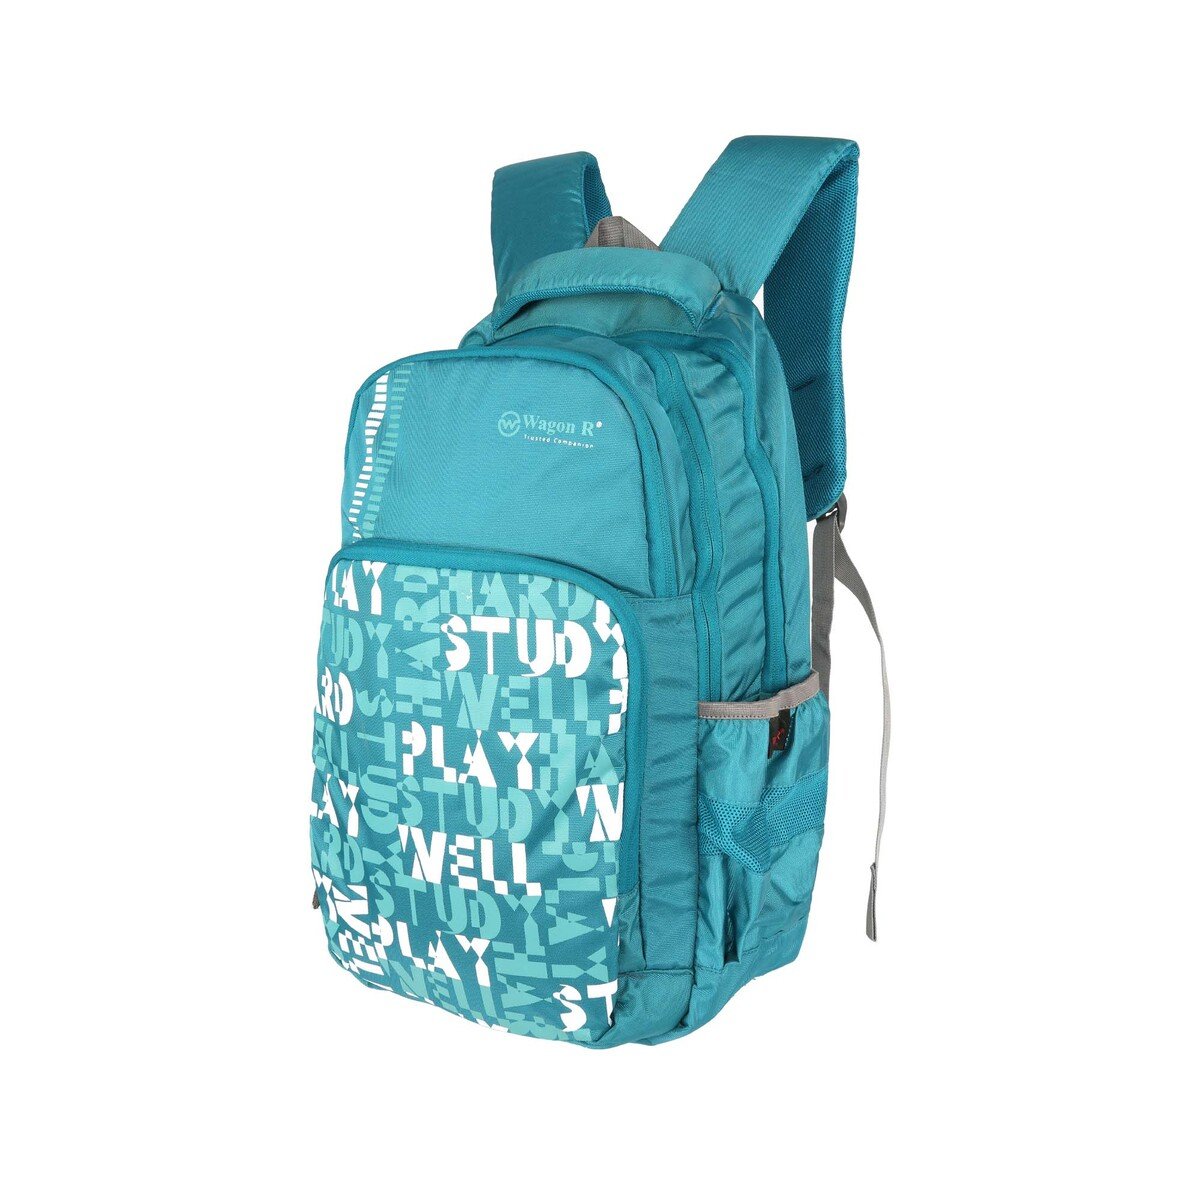 Wagon-R Jazzy Backpack BKP610 19 Inch